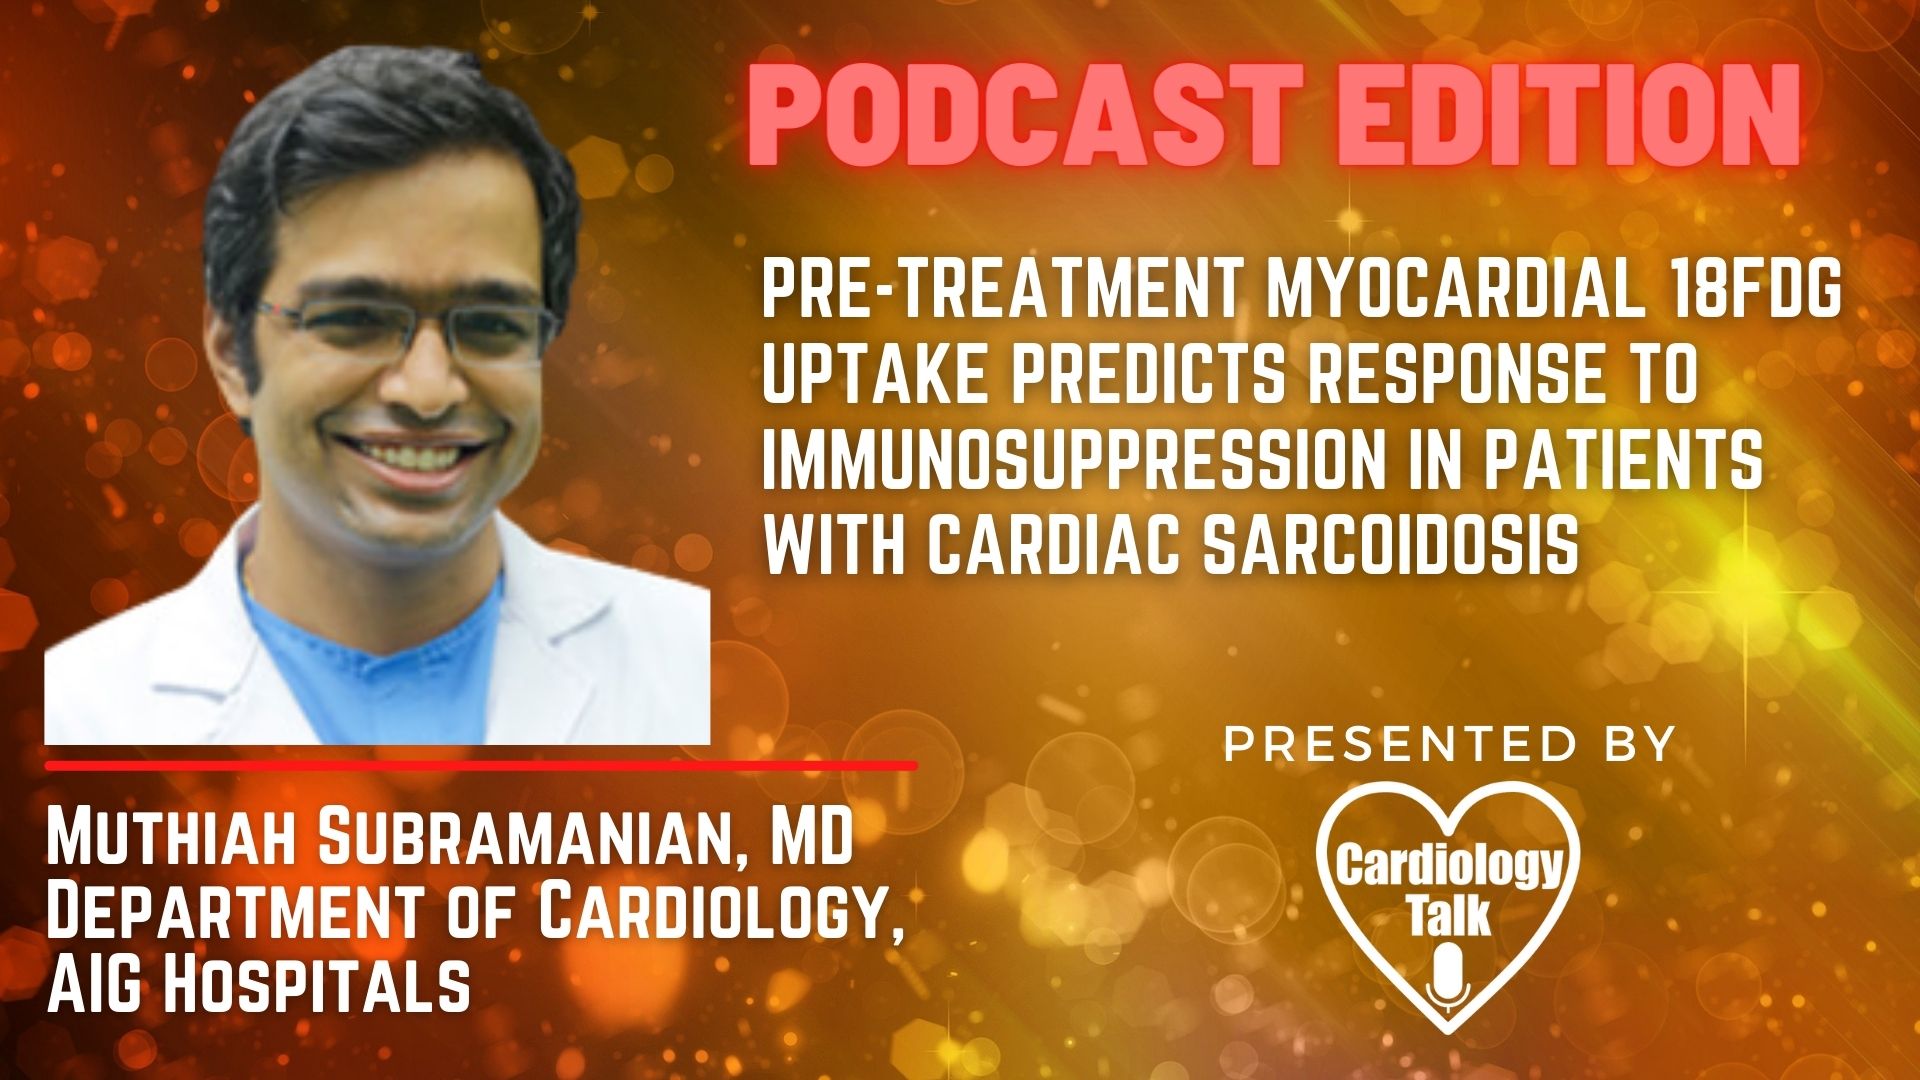 Podcast- Dr. Muthiah Subramanian MBBS, MD, DM, MRCP- @aig_electrophys #CardiacSarcoidosis #FDGPETUptake #Cardiology #Research